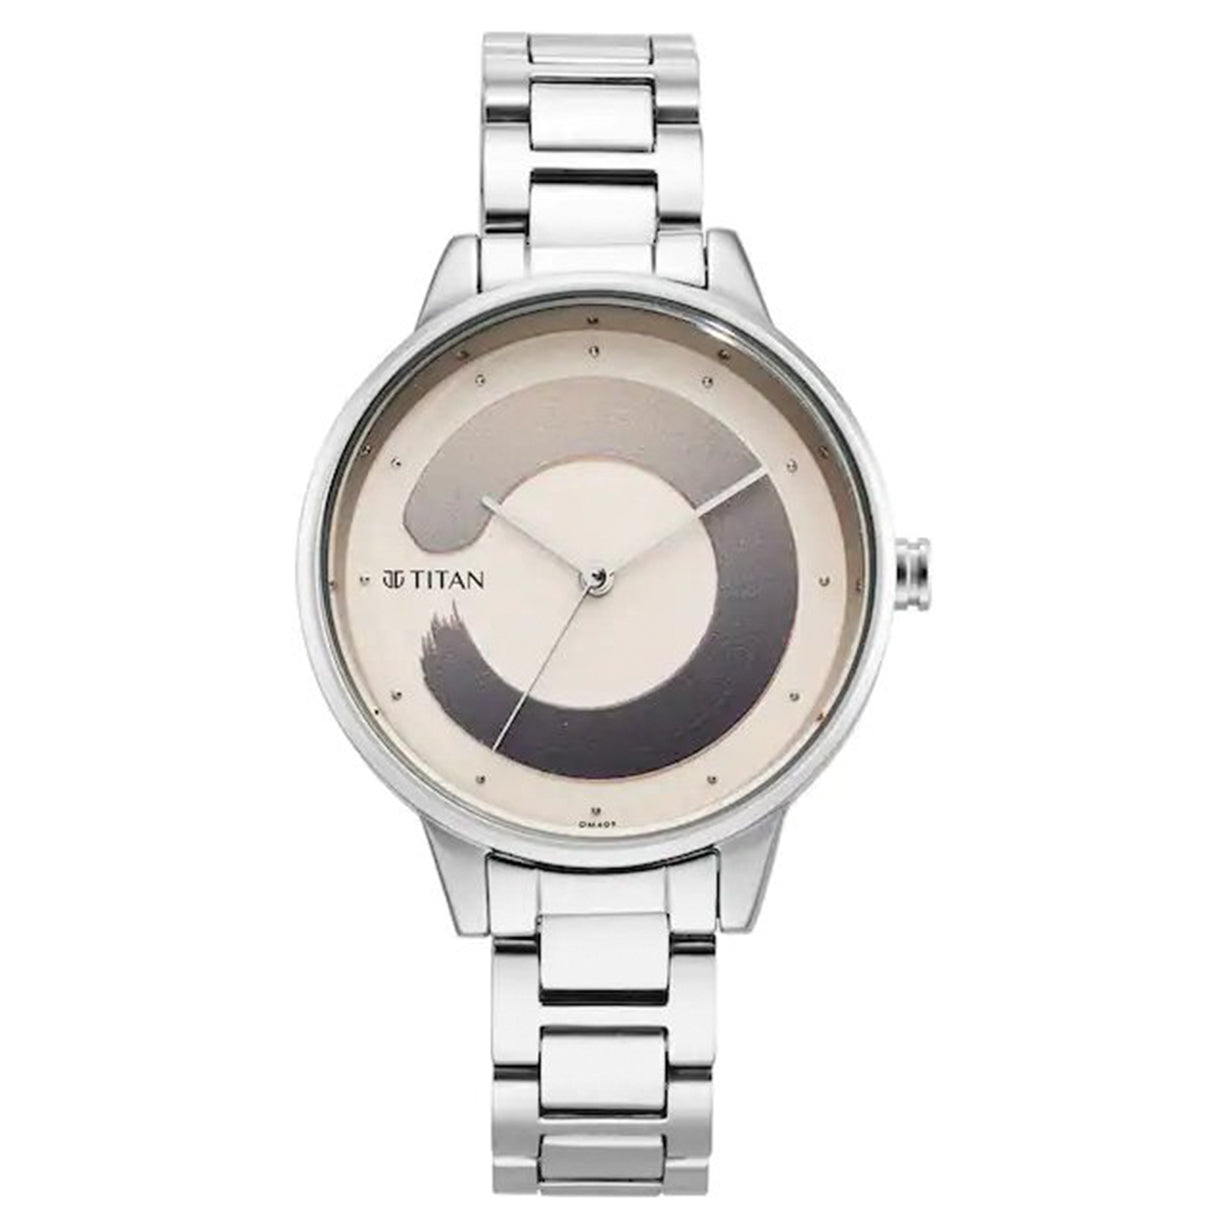 VICTOR WATCHES (@victorwatches) • Instagram photos and videos